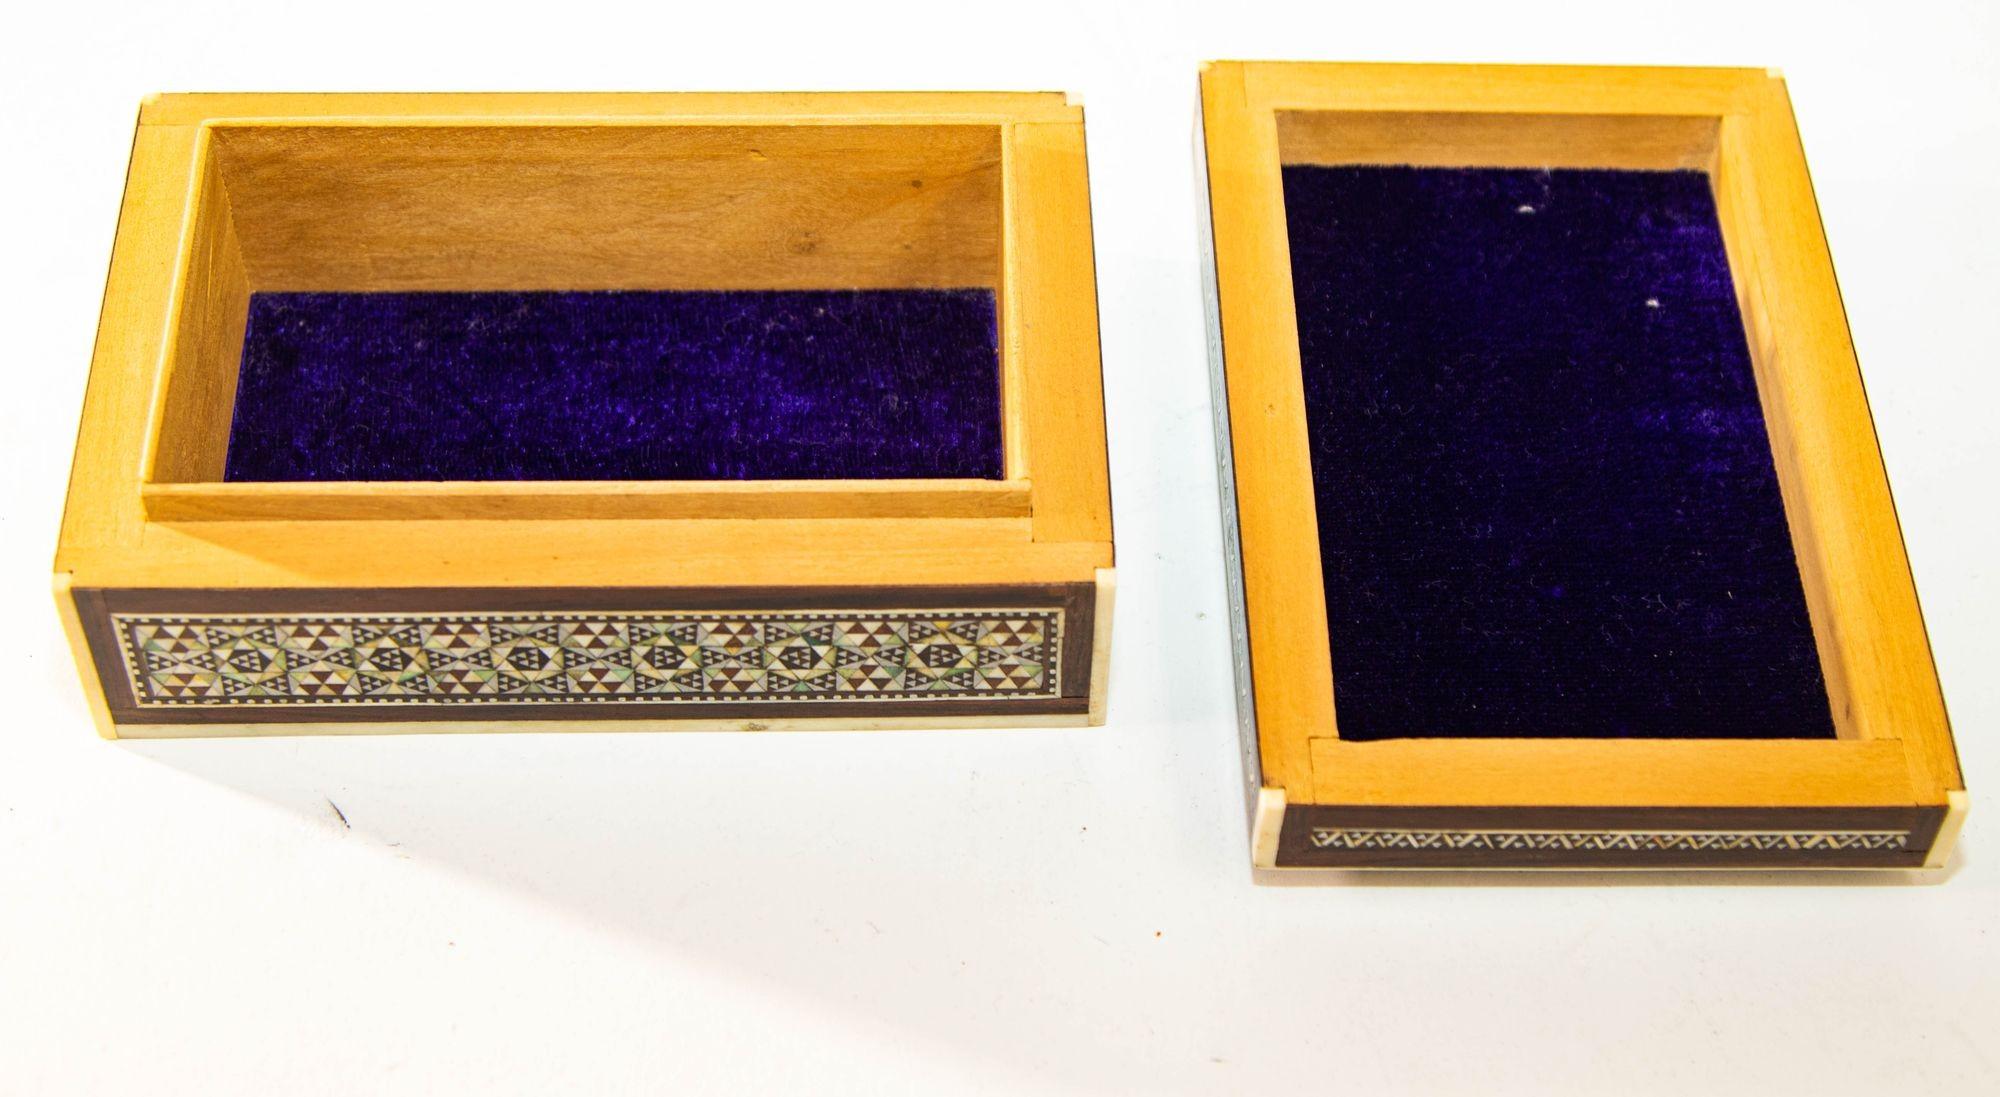 1940s Mother of Pearl Inlaid Decorative Middle Eastern Islamic Box For Sale 1